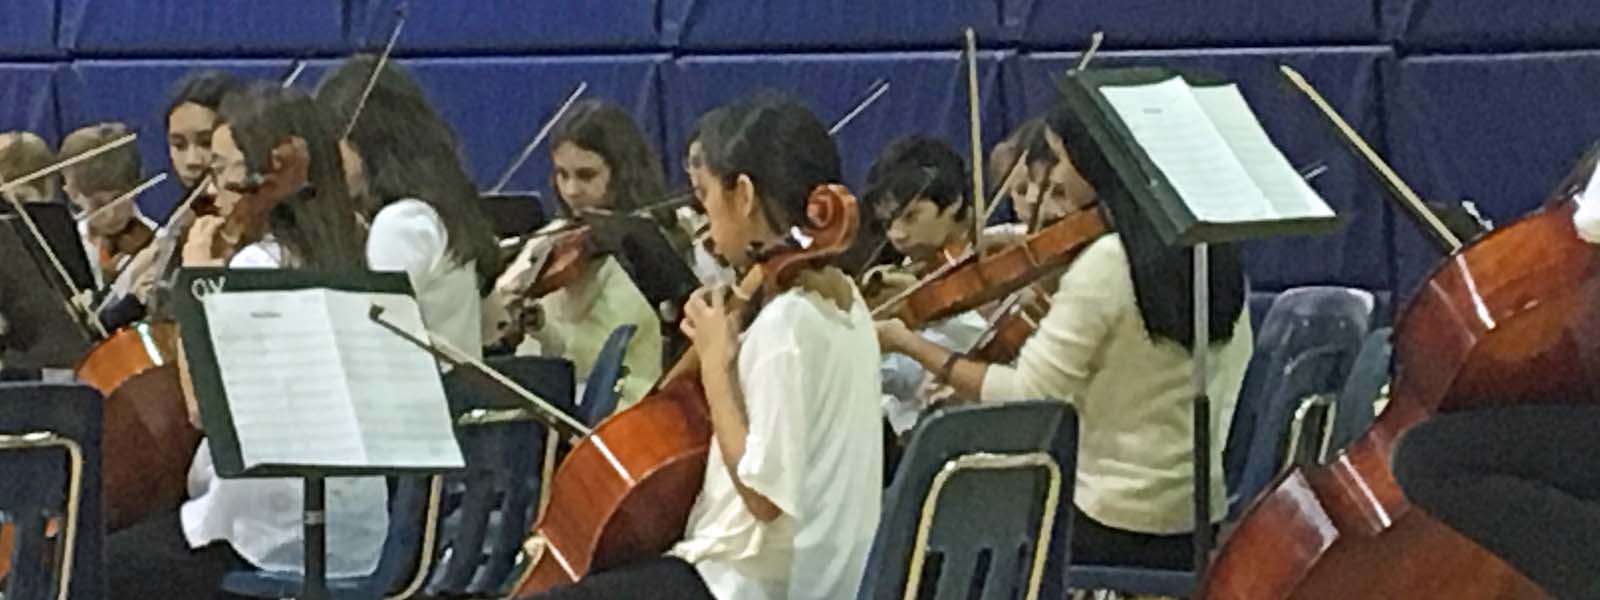 students playing musical instruments